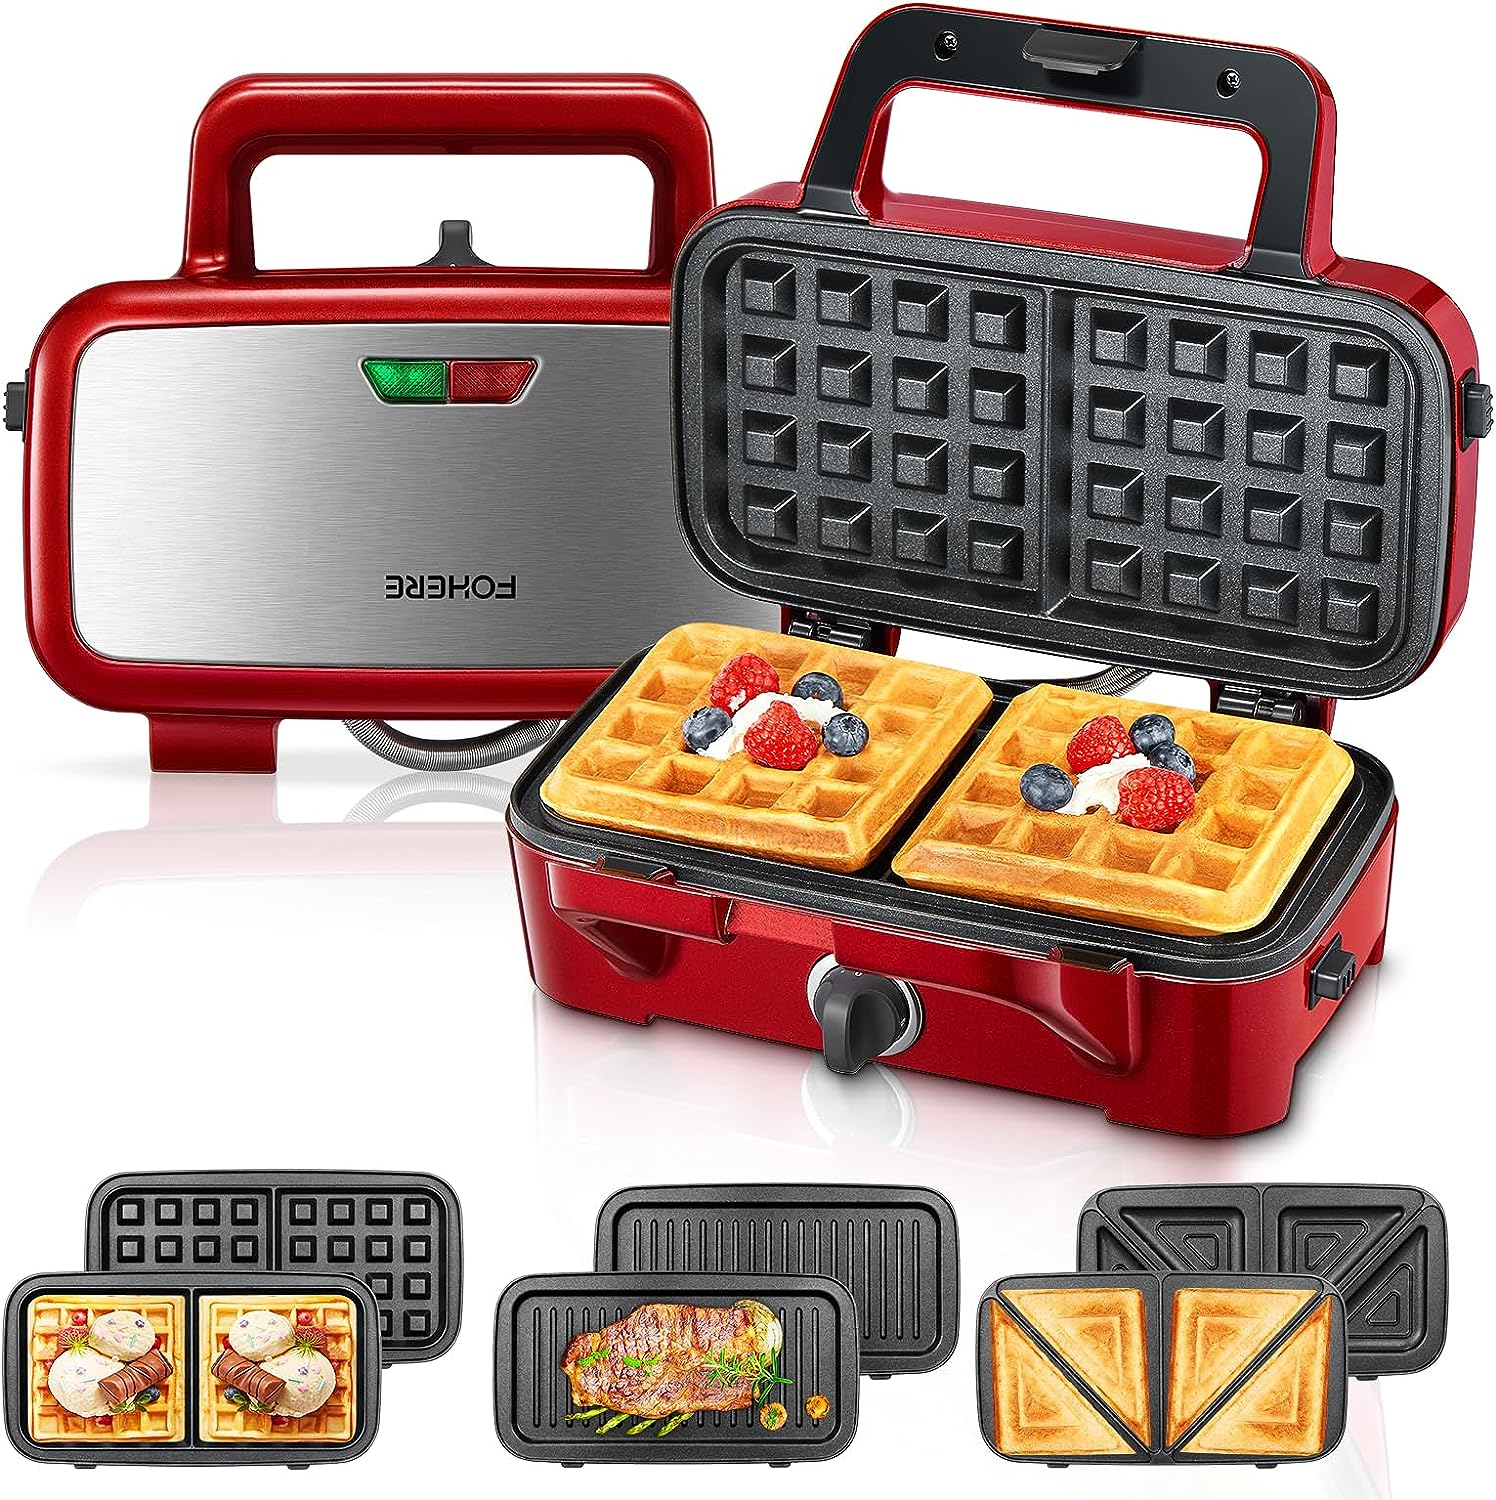 Sandwich Maker 3-in-1, 1200 W Waffle Iron/Contact Grill/Sandwich Toaster, 5-Speed Temperature Control, Non-Stick Coating Plate Sets, Heat-Insulated Handle, Dishwasher Safe, LED Lights, Red